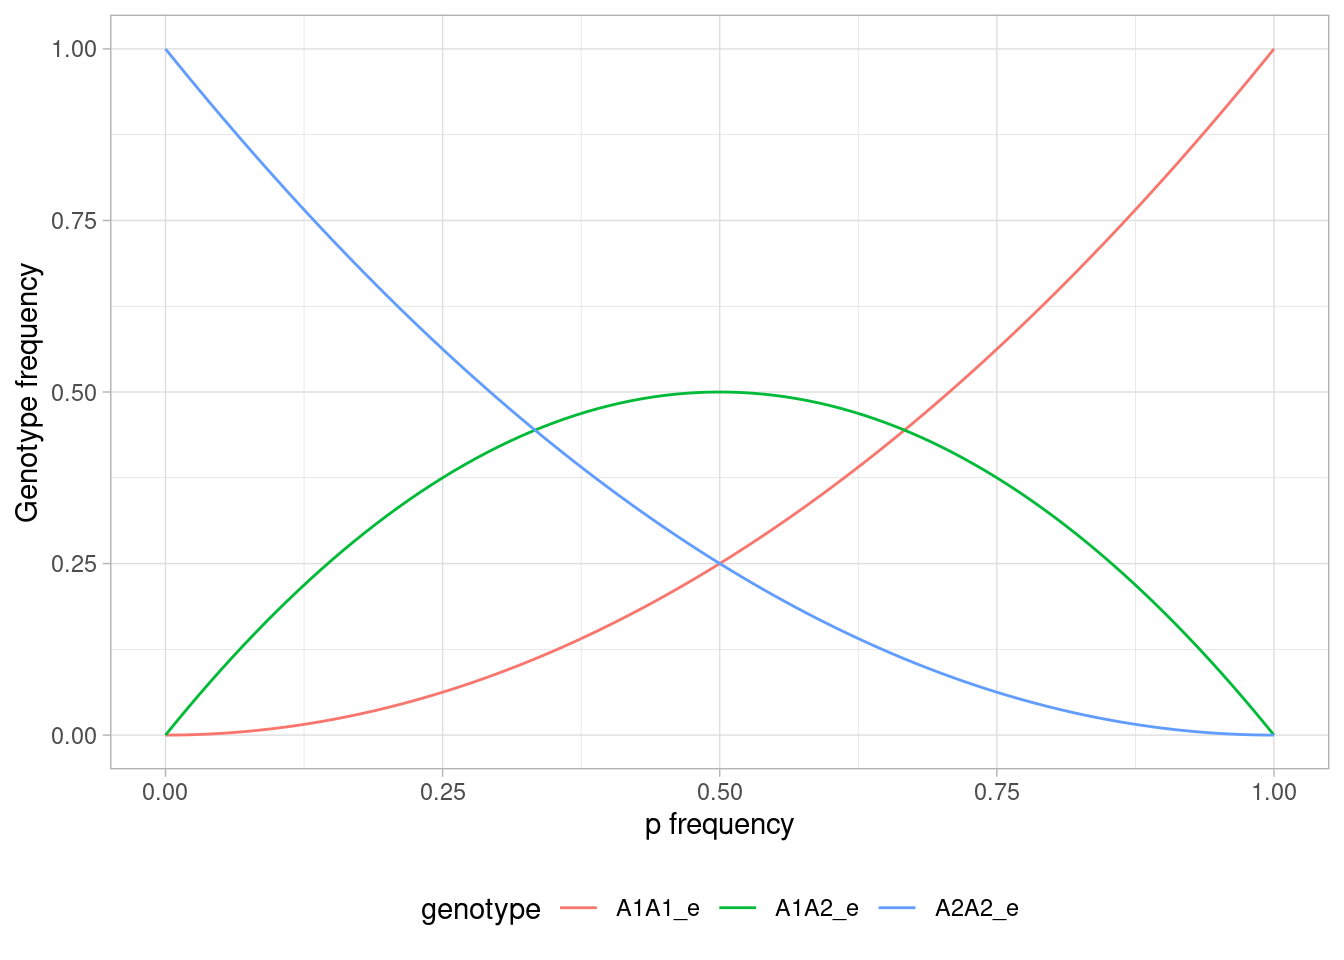 Relationship between allele frequency and genotype frequency under Hardy-Weinberg equilibrium.